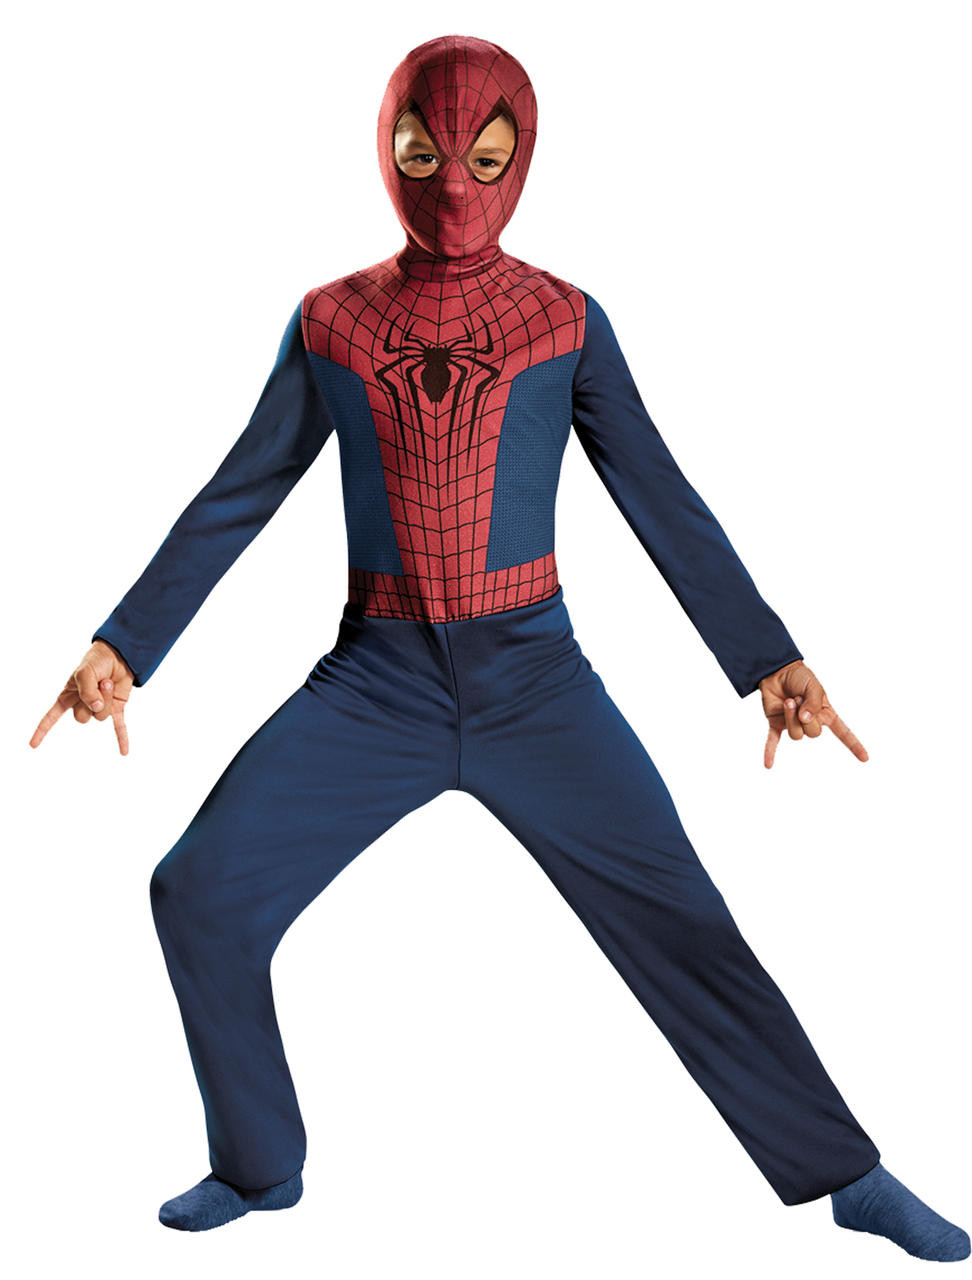 Hasbro Spider-Man: No Way Home Electronic Glow FX Mask